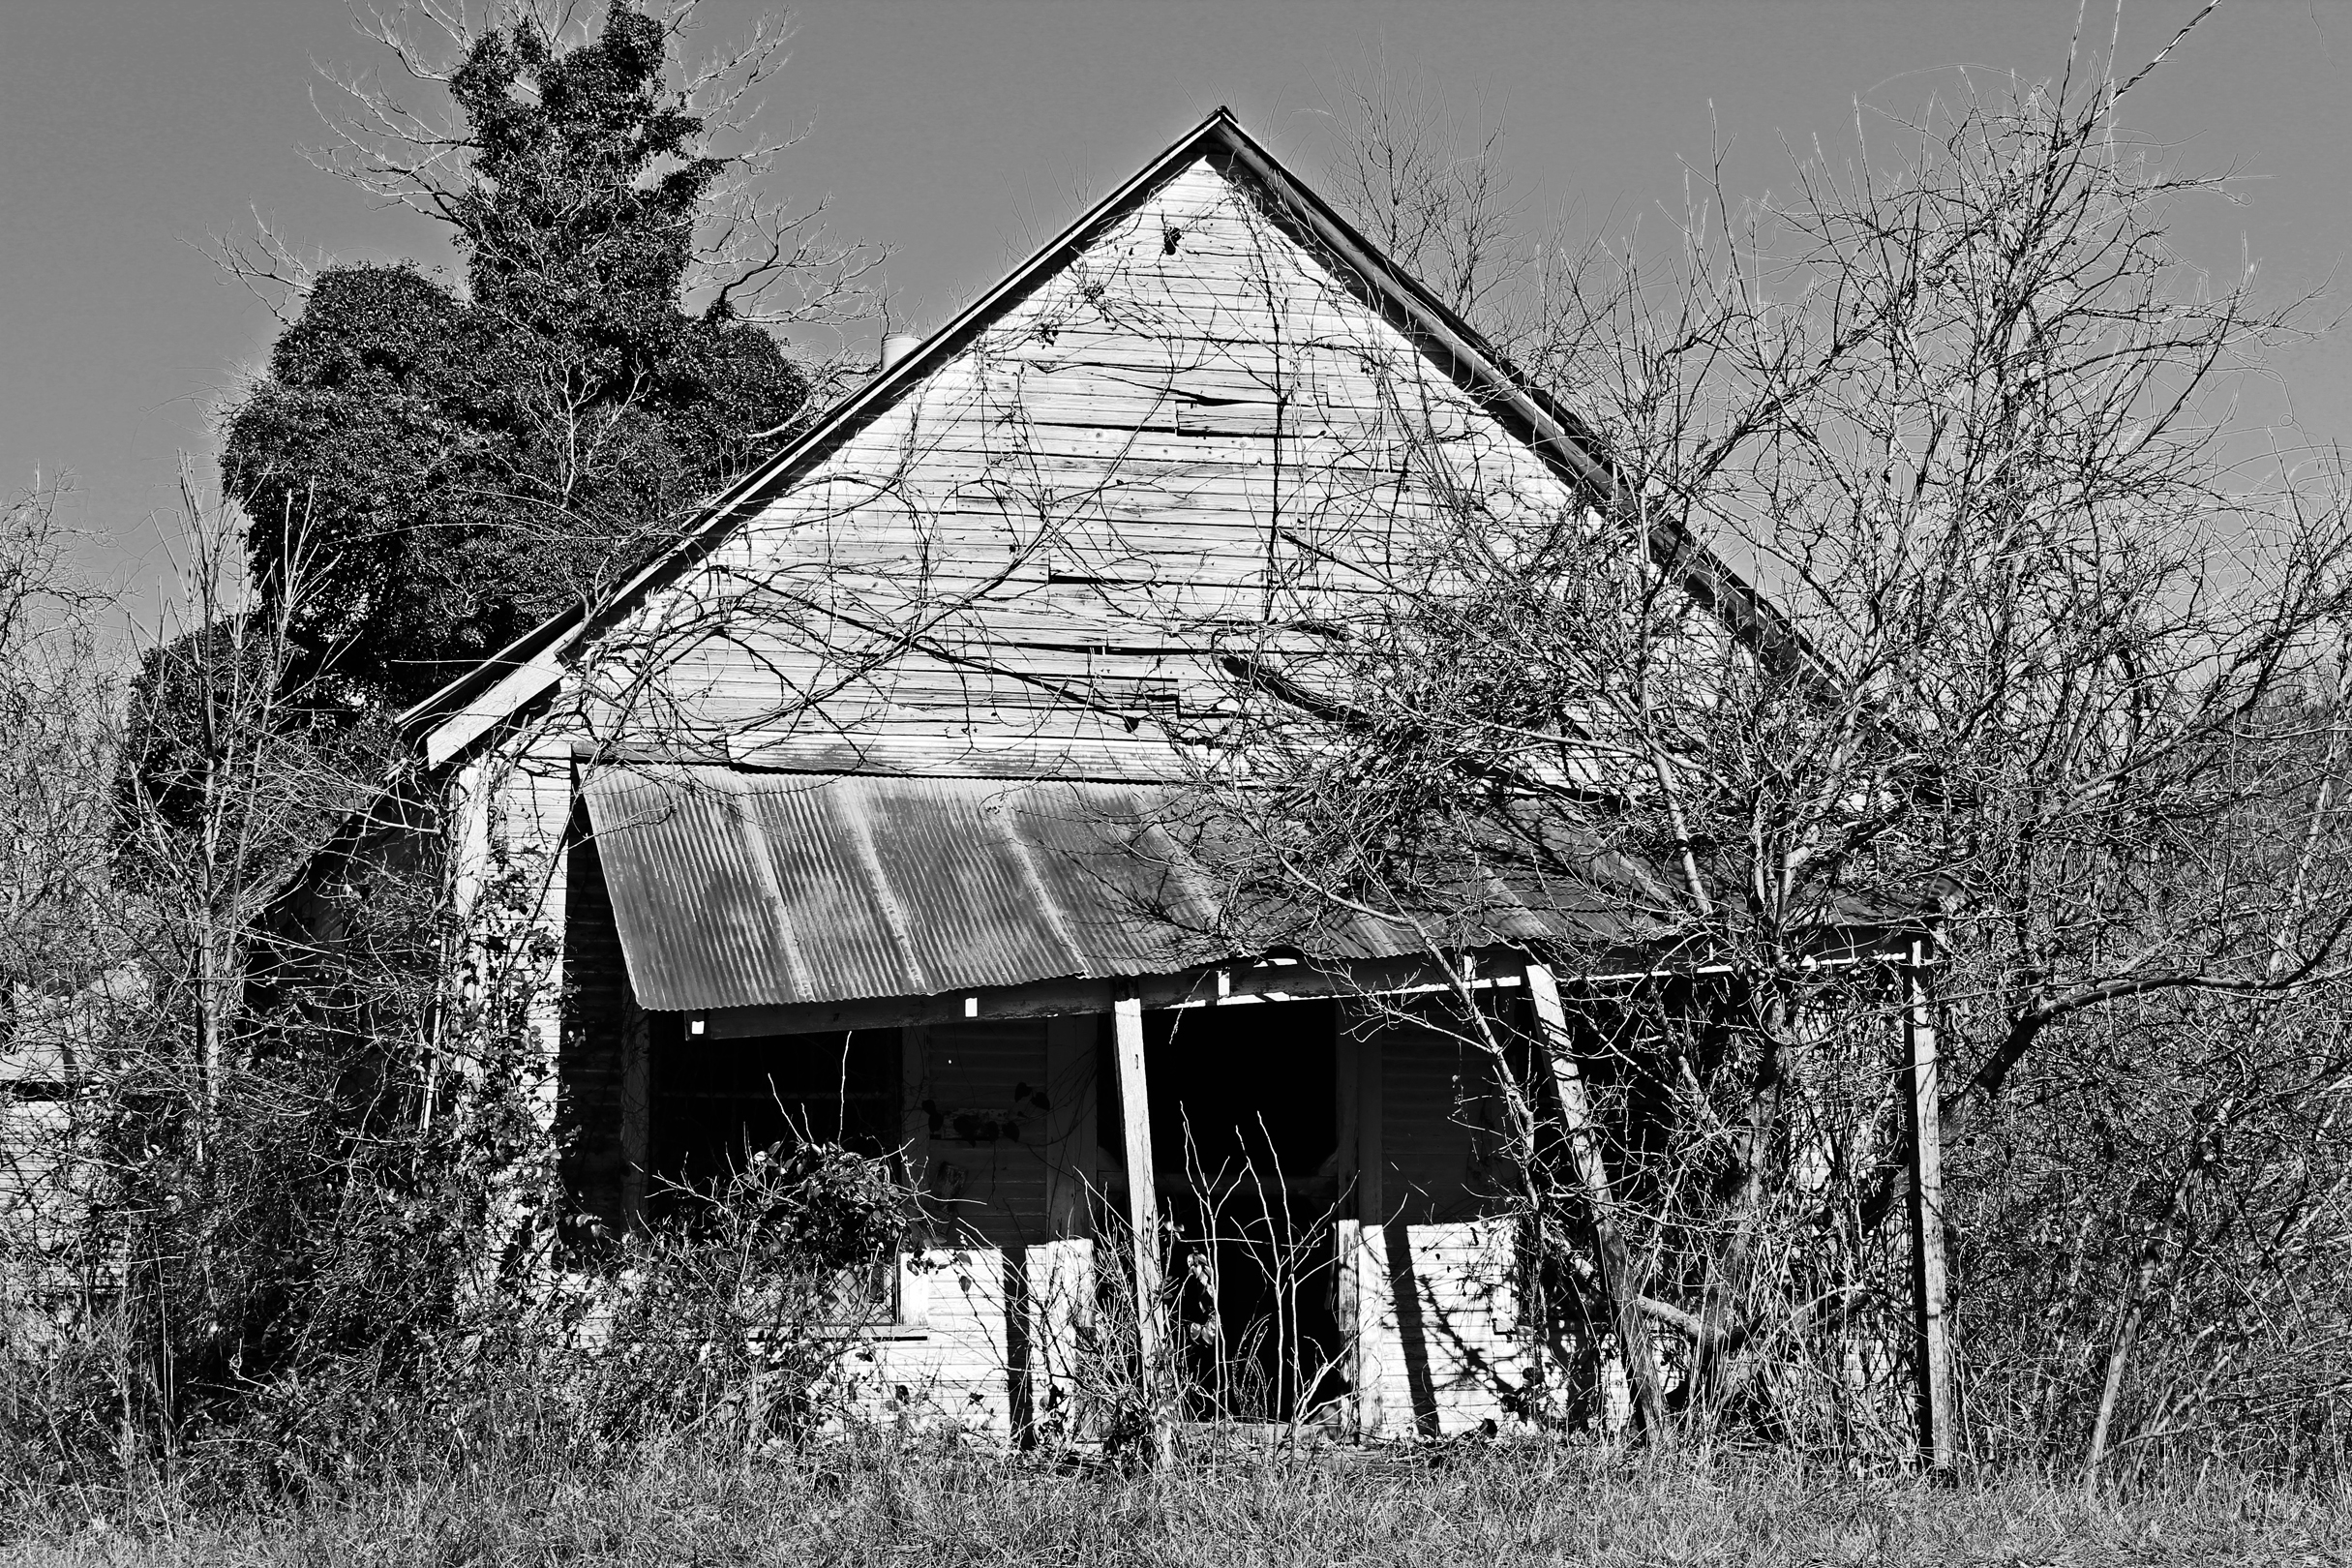    Red Star Store  , 2014. Red Star, Madison County, AR. B&amp;W HDR digital image. 